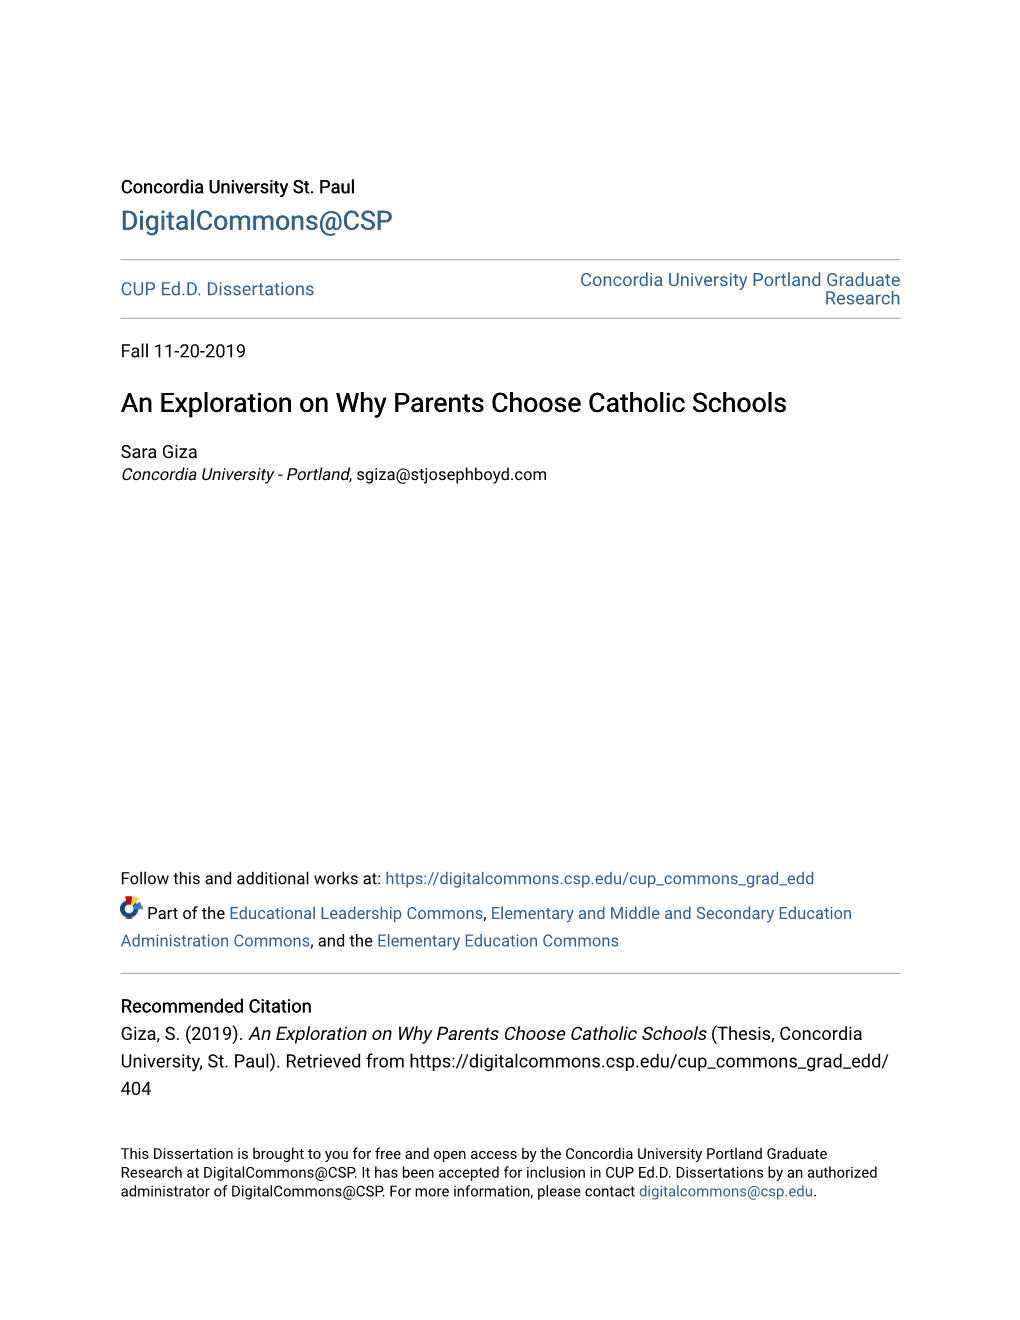 An Exploration on Why Parents Choose Catholic Schools